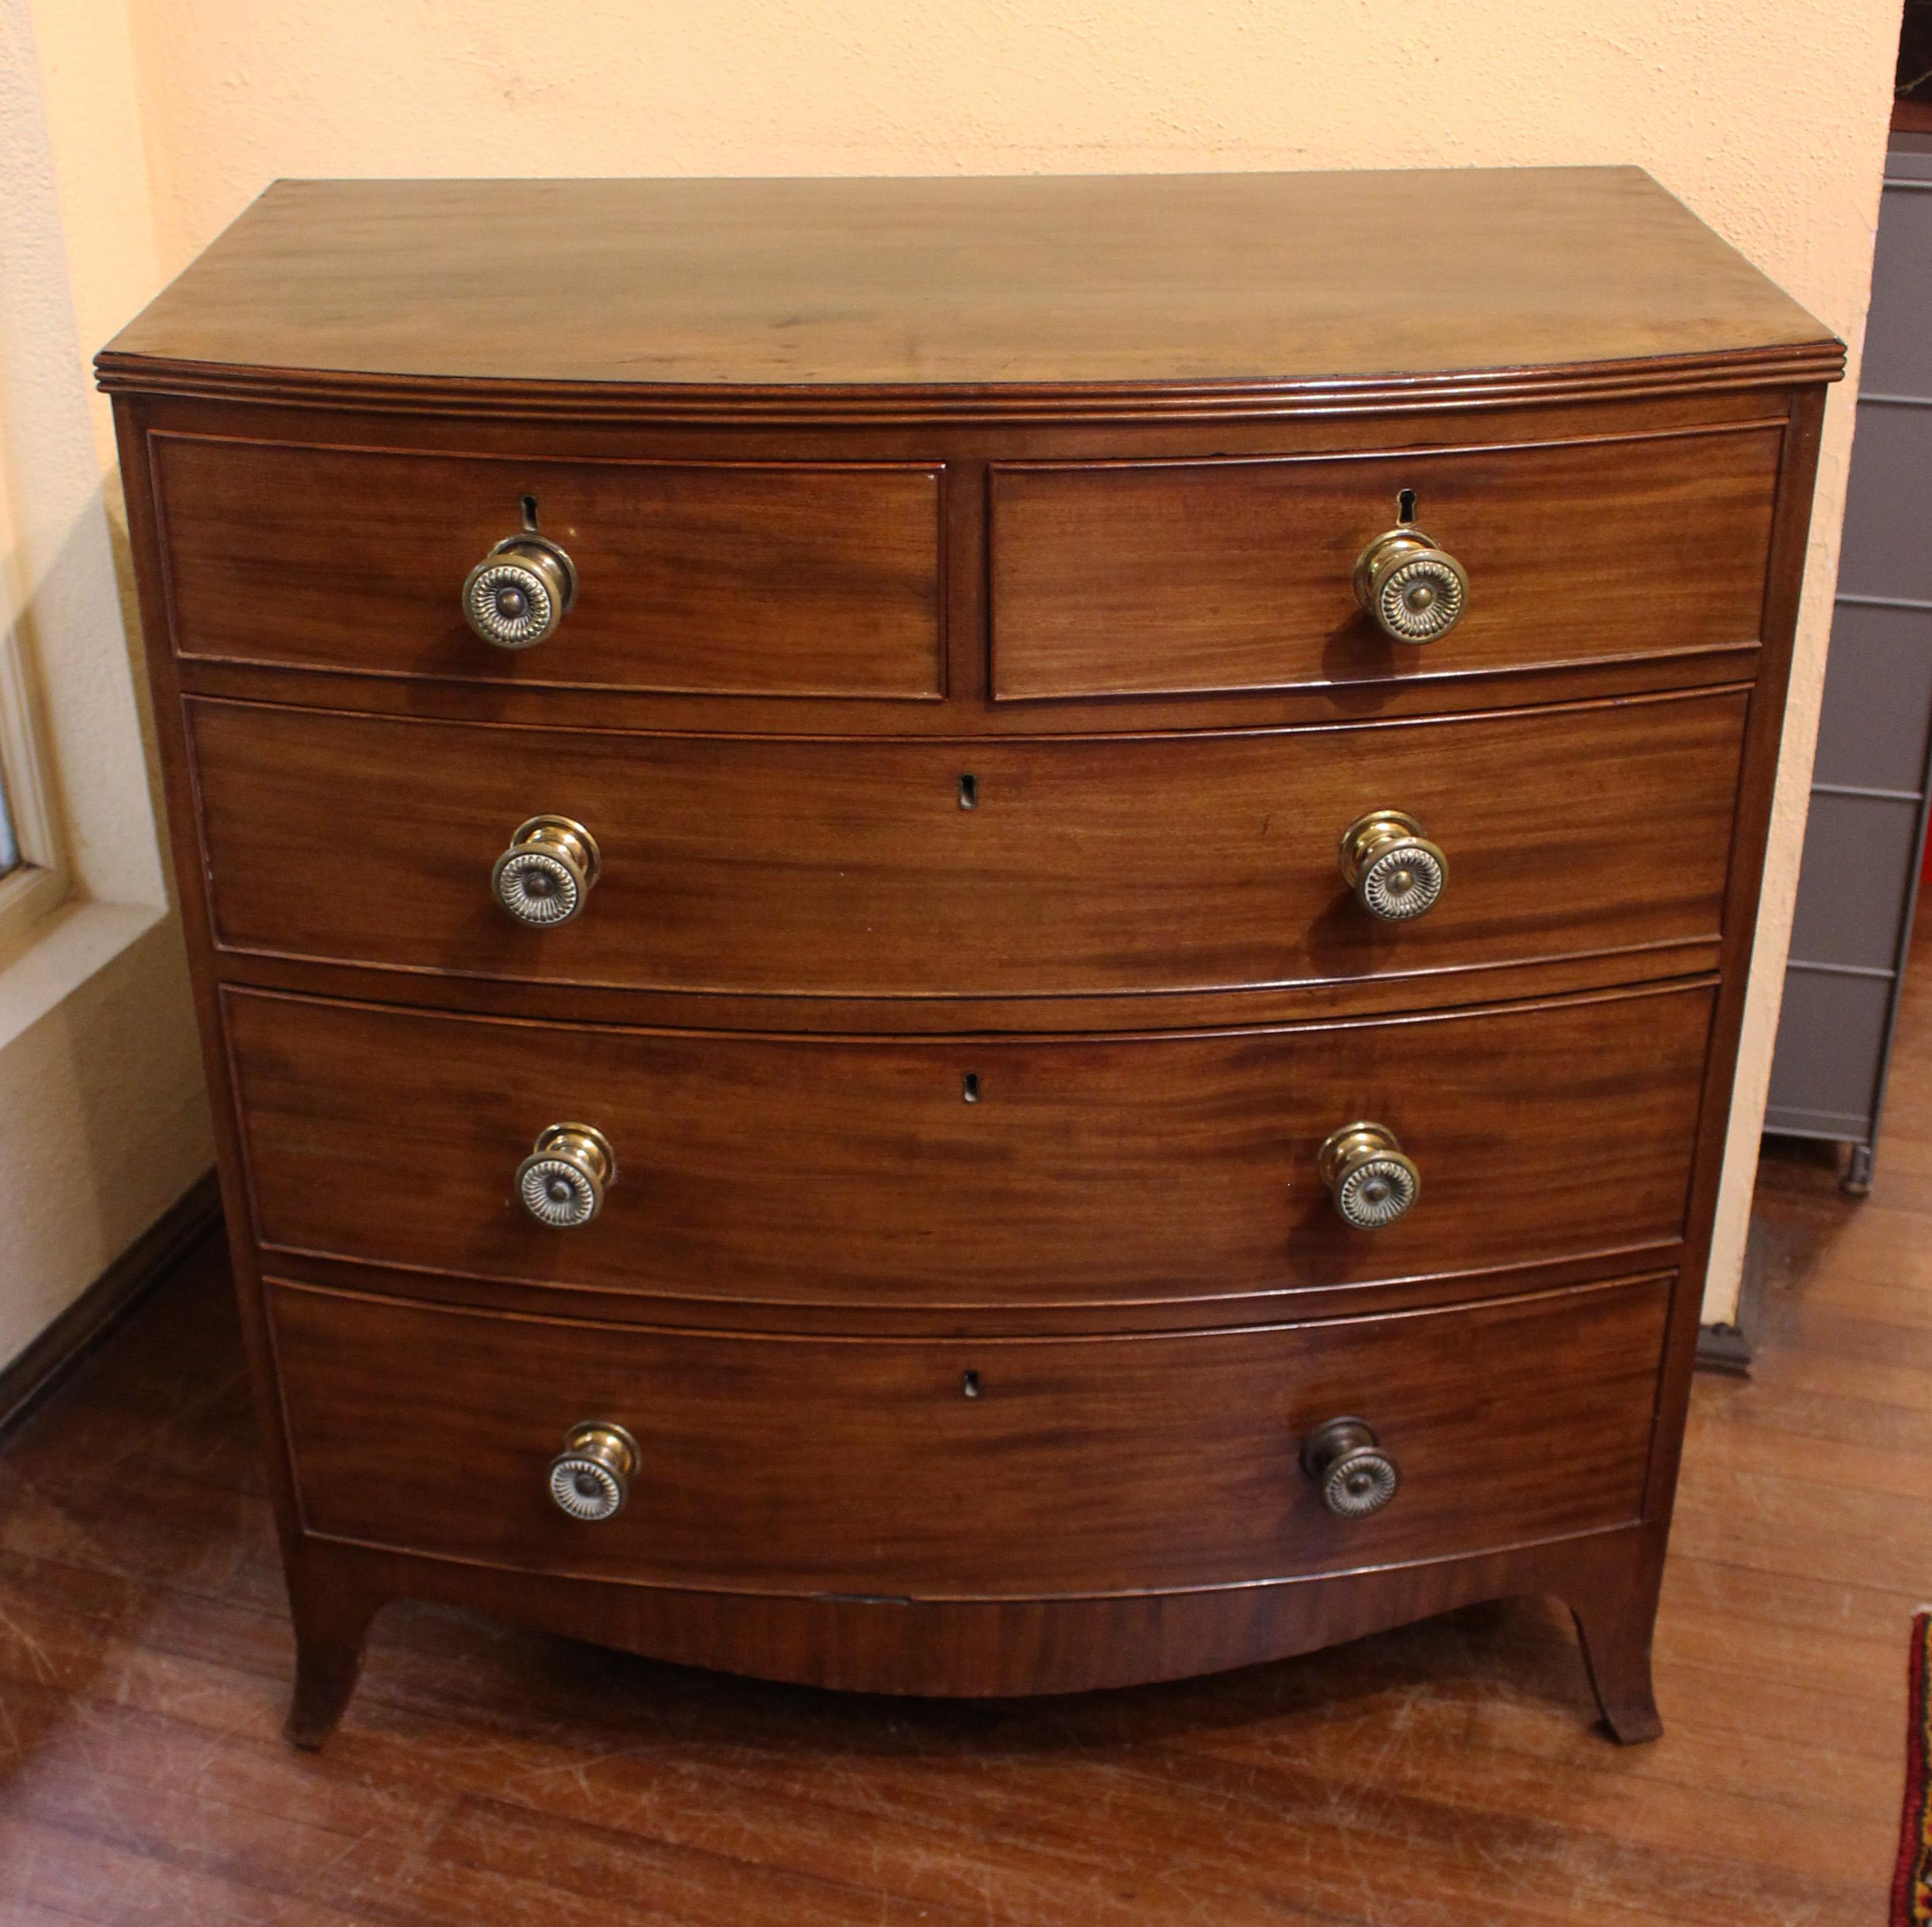 Regency period c.1800 bowfront chest of drawers, English. Two over three drawer form raised on French splay feet with shaped aprons. Triple reeded top. Well figured mahogany with oak & pine secondary woods. Original quality turned brass pulls with